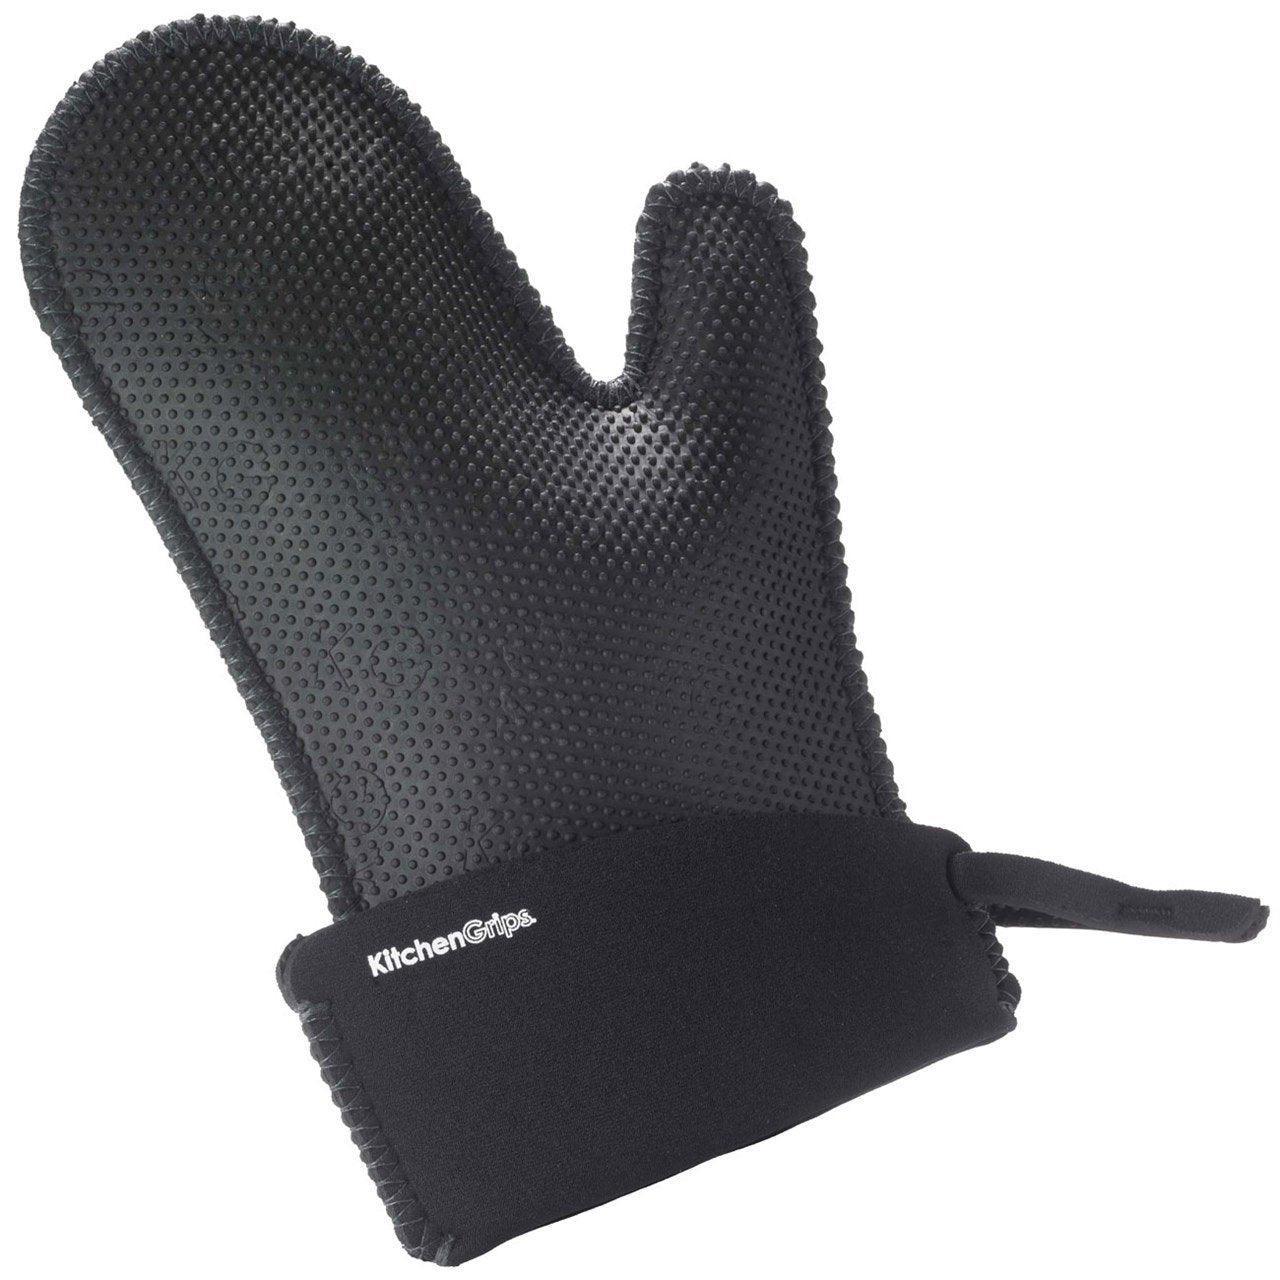 Kitchen Grips Extra Long Oven Mitt - The Low Vision Store